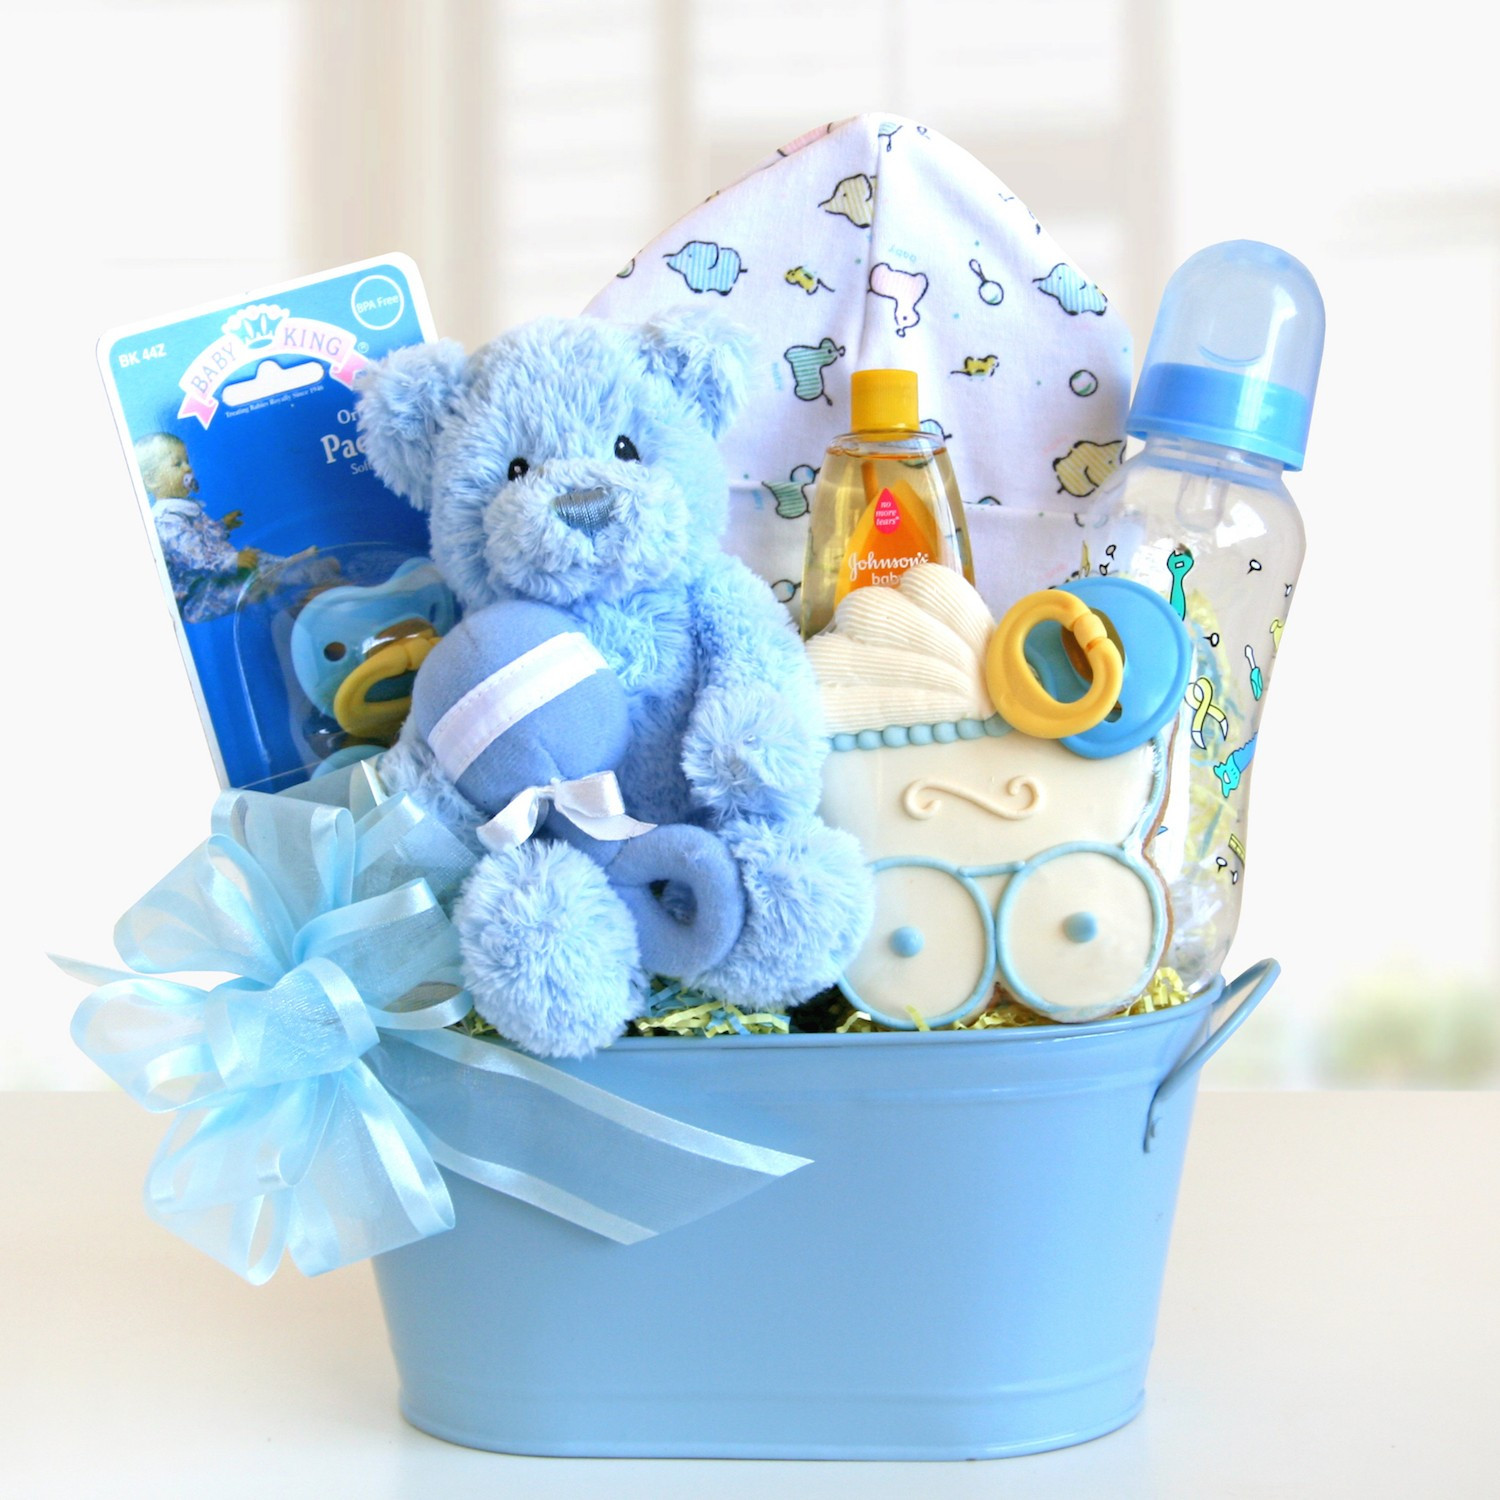 New Born Baby Boy Gifts
 Sweet and Cuddly Baby Boy Gift Basket Gift Baskets Plus